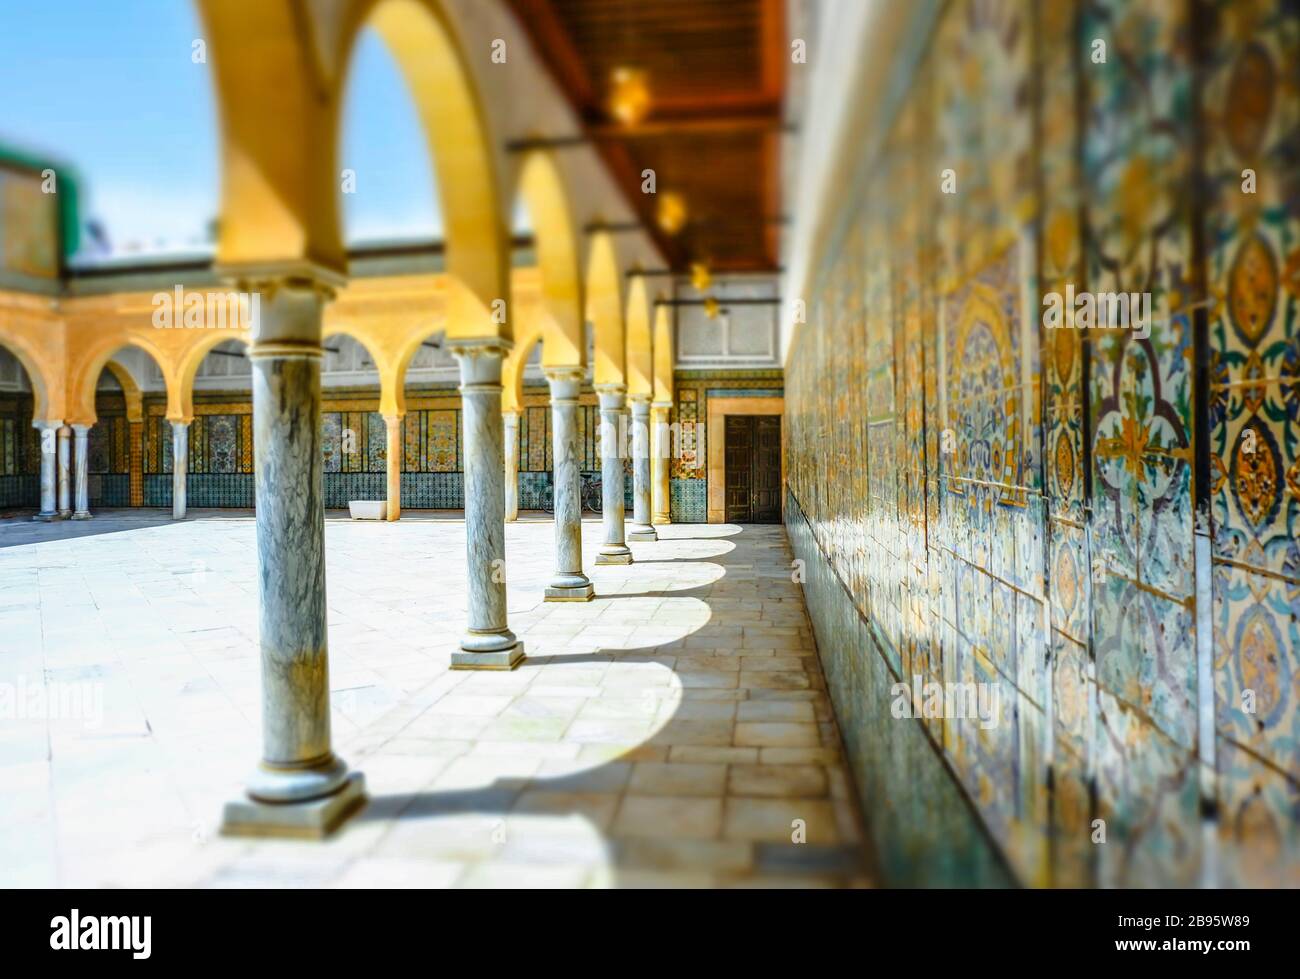 Courtyard in a mosque. Stock Photo